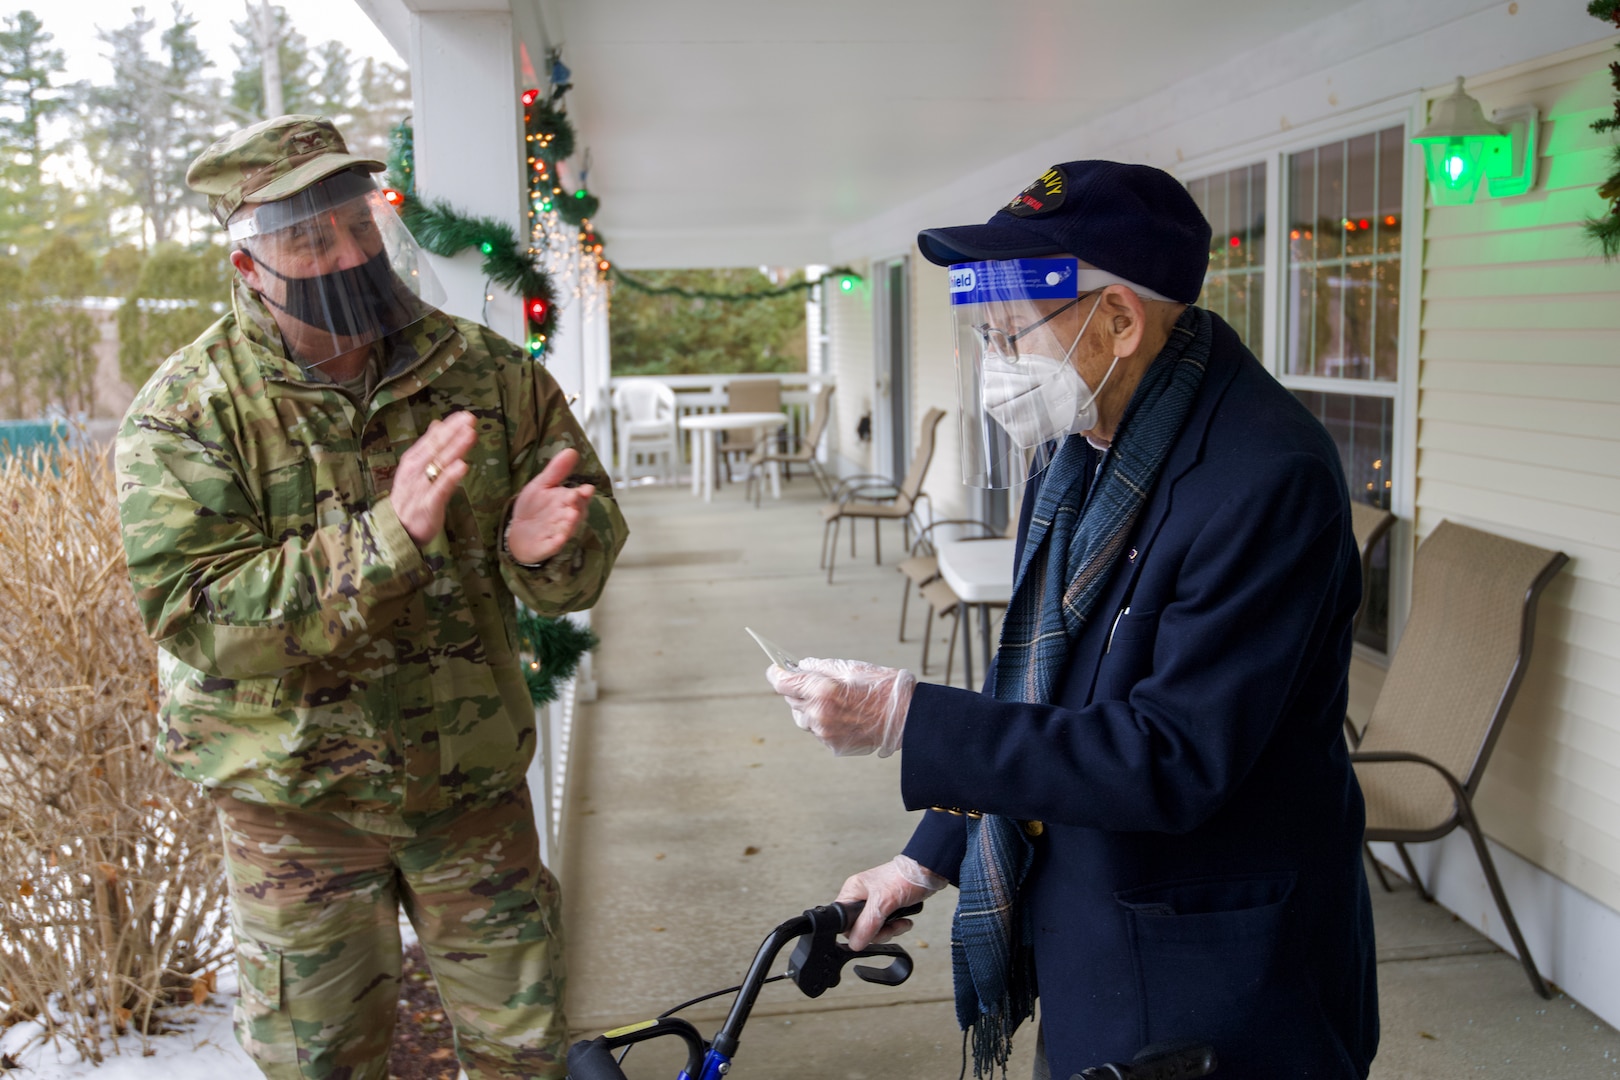 Col. Adam Rice (left), vice wing commander of the 158th Fighter Wing, Vermont Air National Guard, thanks WWII veteran Lenny Roberge, Vermont’s oldest living veteran, for his military service at a small ceremony in South Burlington, Vt., Dec. 22, 2020. In order to honor Roberge, Airmen from the 158th Fighter Wing had a flag flown in an F-35 during a combat training sortie over the mountains of Vermont and New York. (U.S. Air National Guard photo by Senior Master Sgt. Michael Davis)